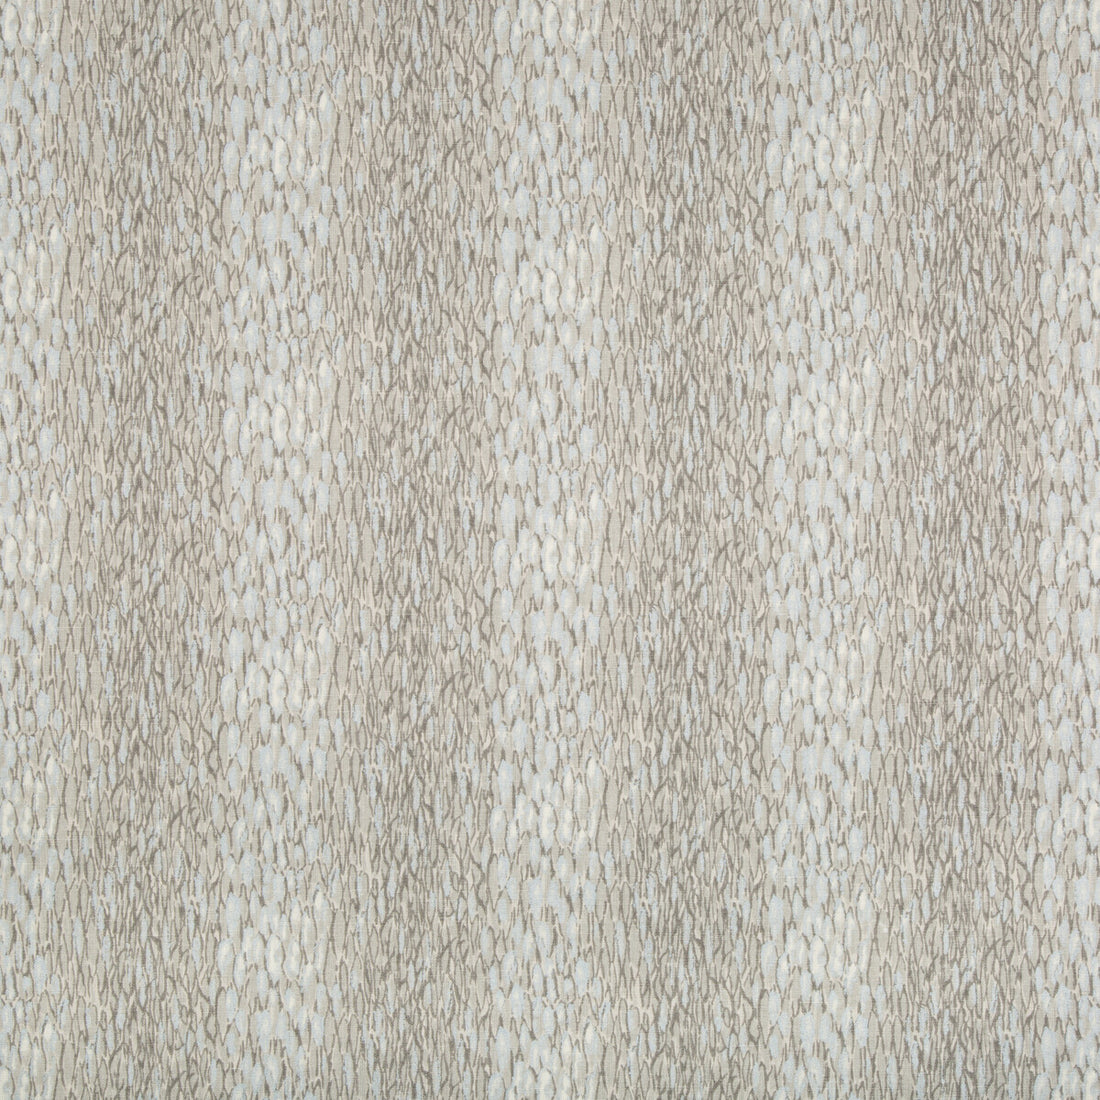 Chromis fabric in metal color - pattern CHROMIS.1611.0 - by Kravet Basics in the Jeffrey Alan Marks Oceanview collection